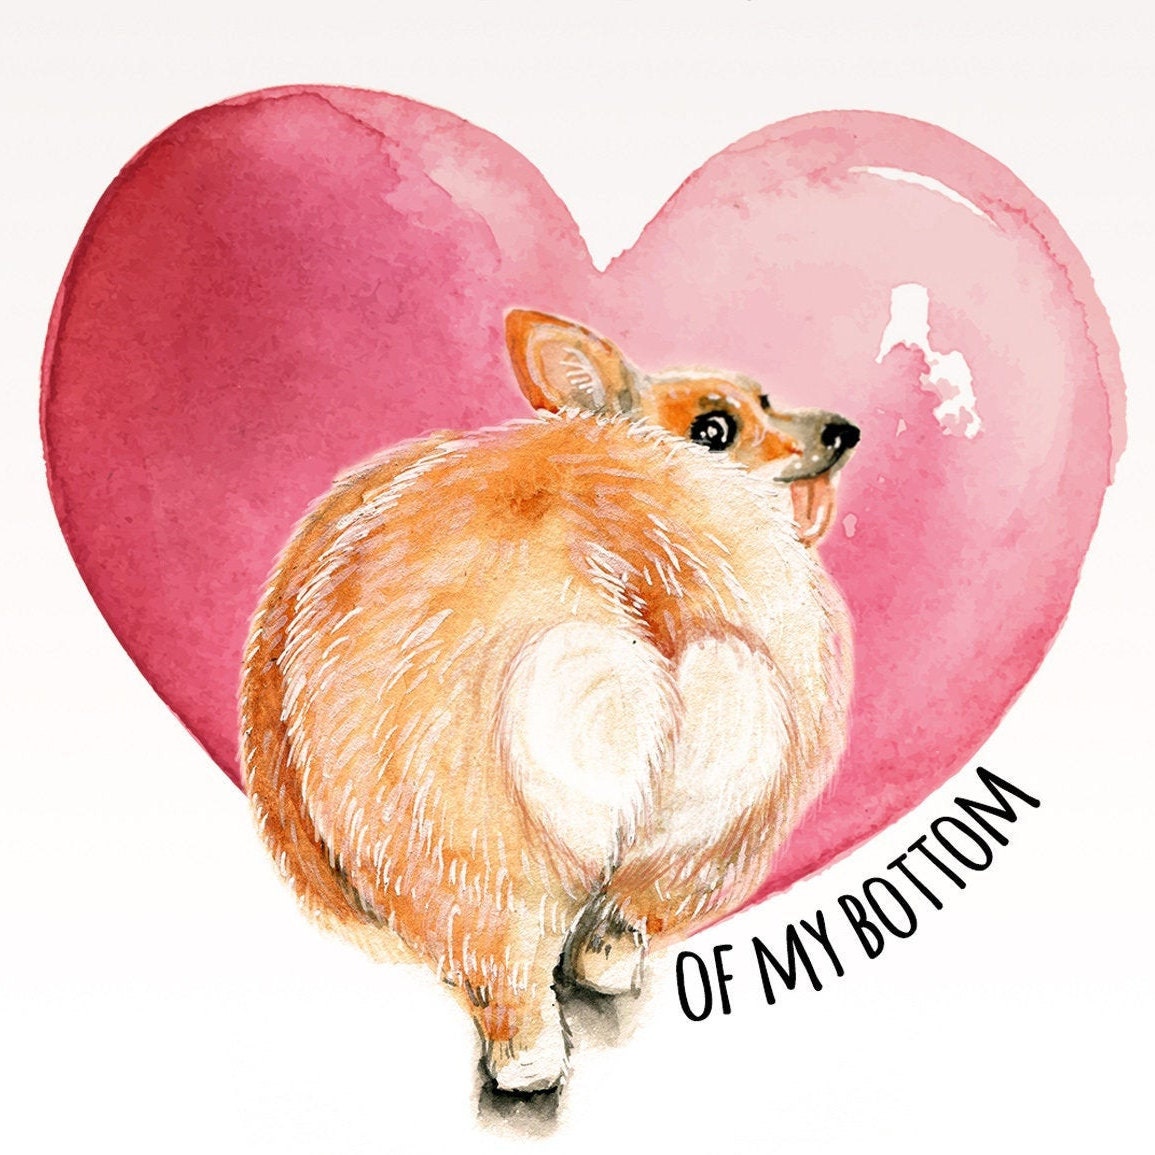 Corgi Butt Funny Anniversary Card For Boyfriend - Love Card From The Dog - Love You From The Heart Of My Bottom